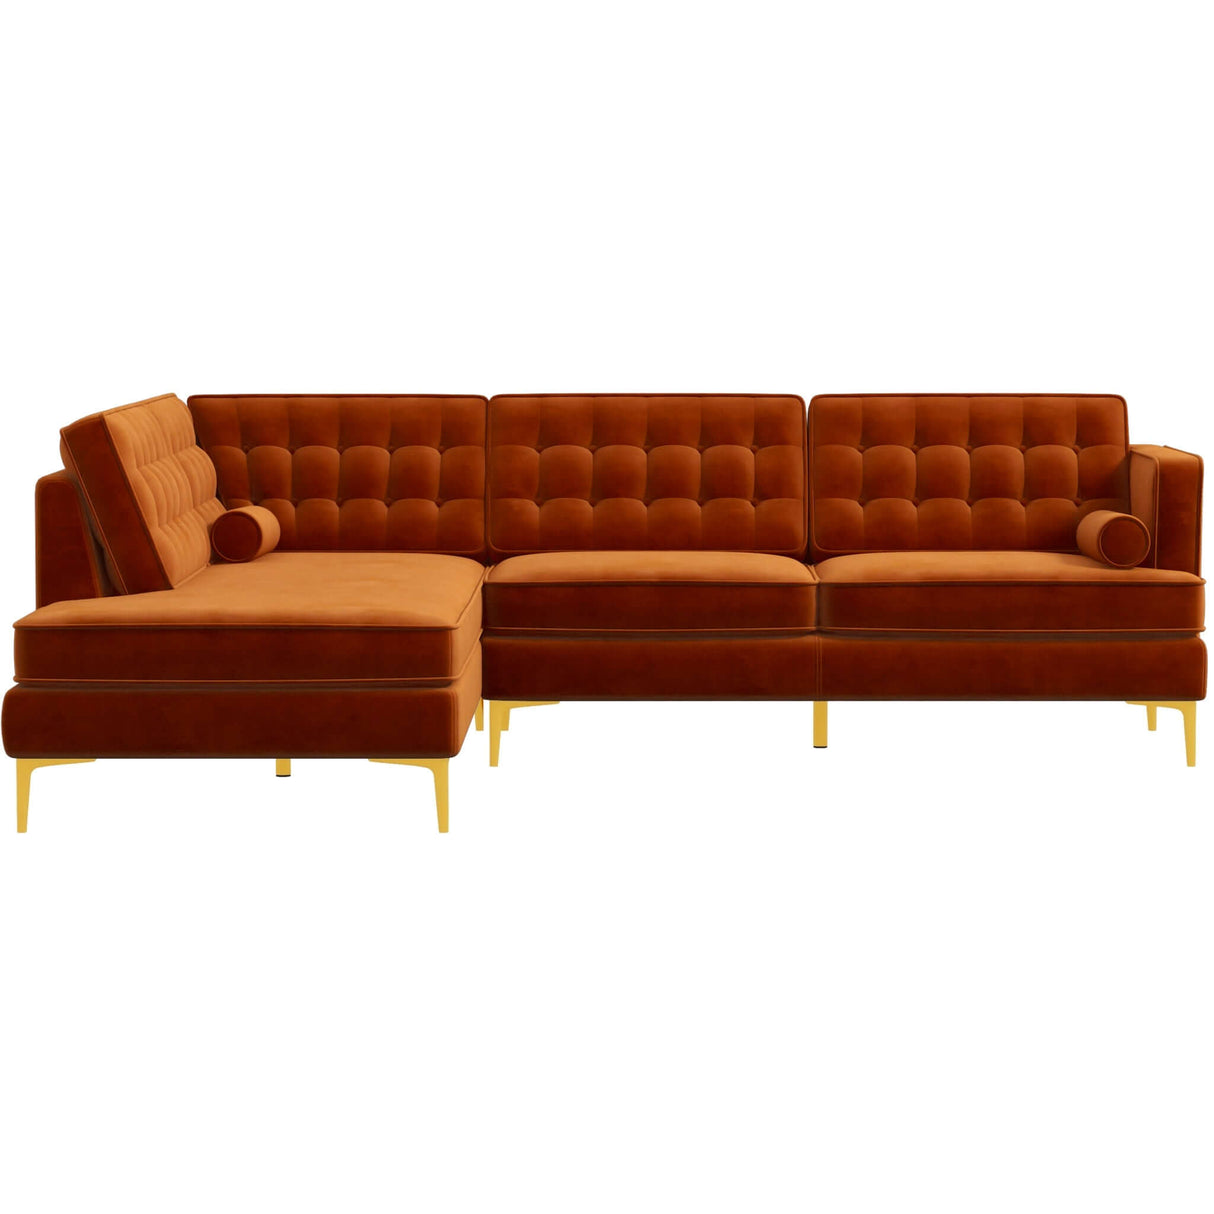 Brooke Mid-Century Modern  Sectional Sofa Green / Right Facing